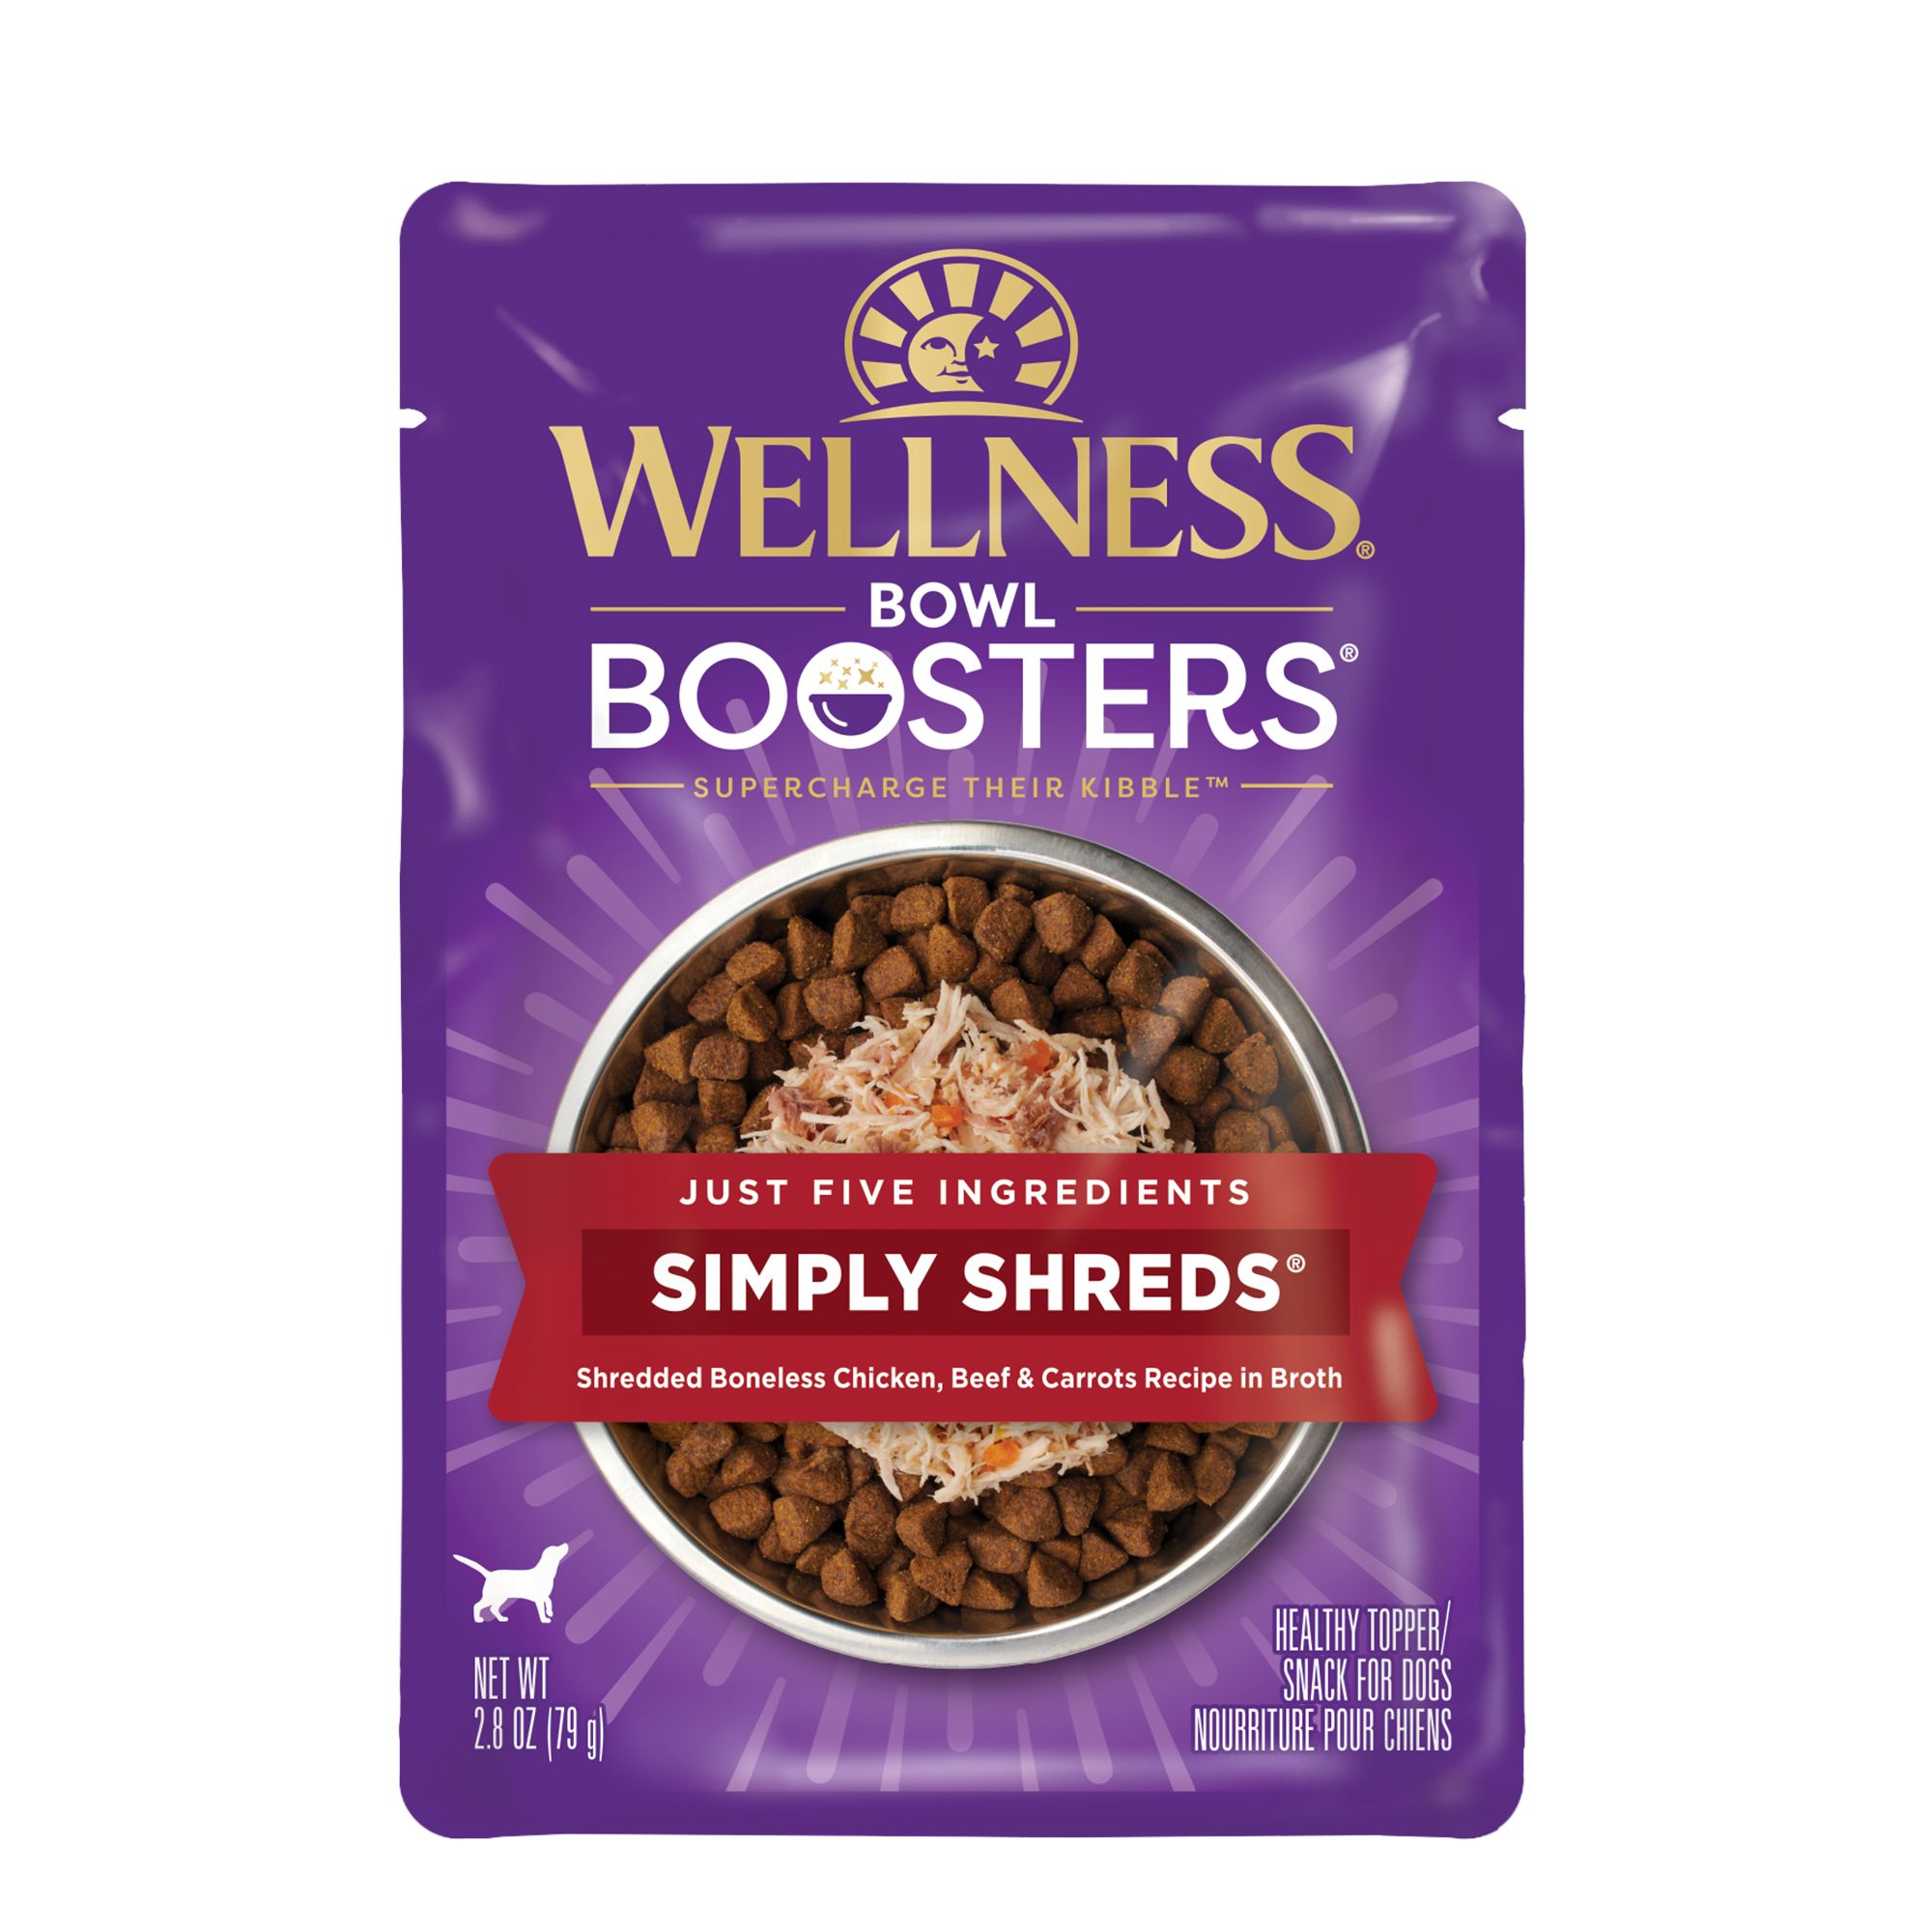 Wellness Bowl Boosters. Simply shreds.